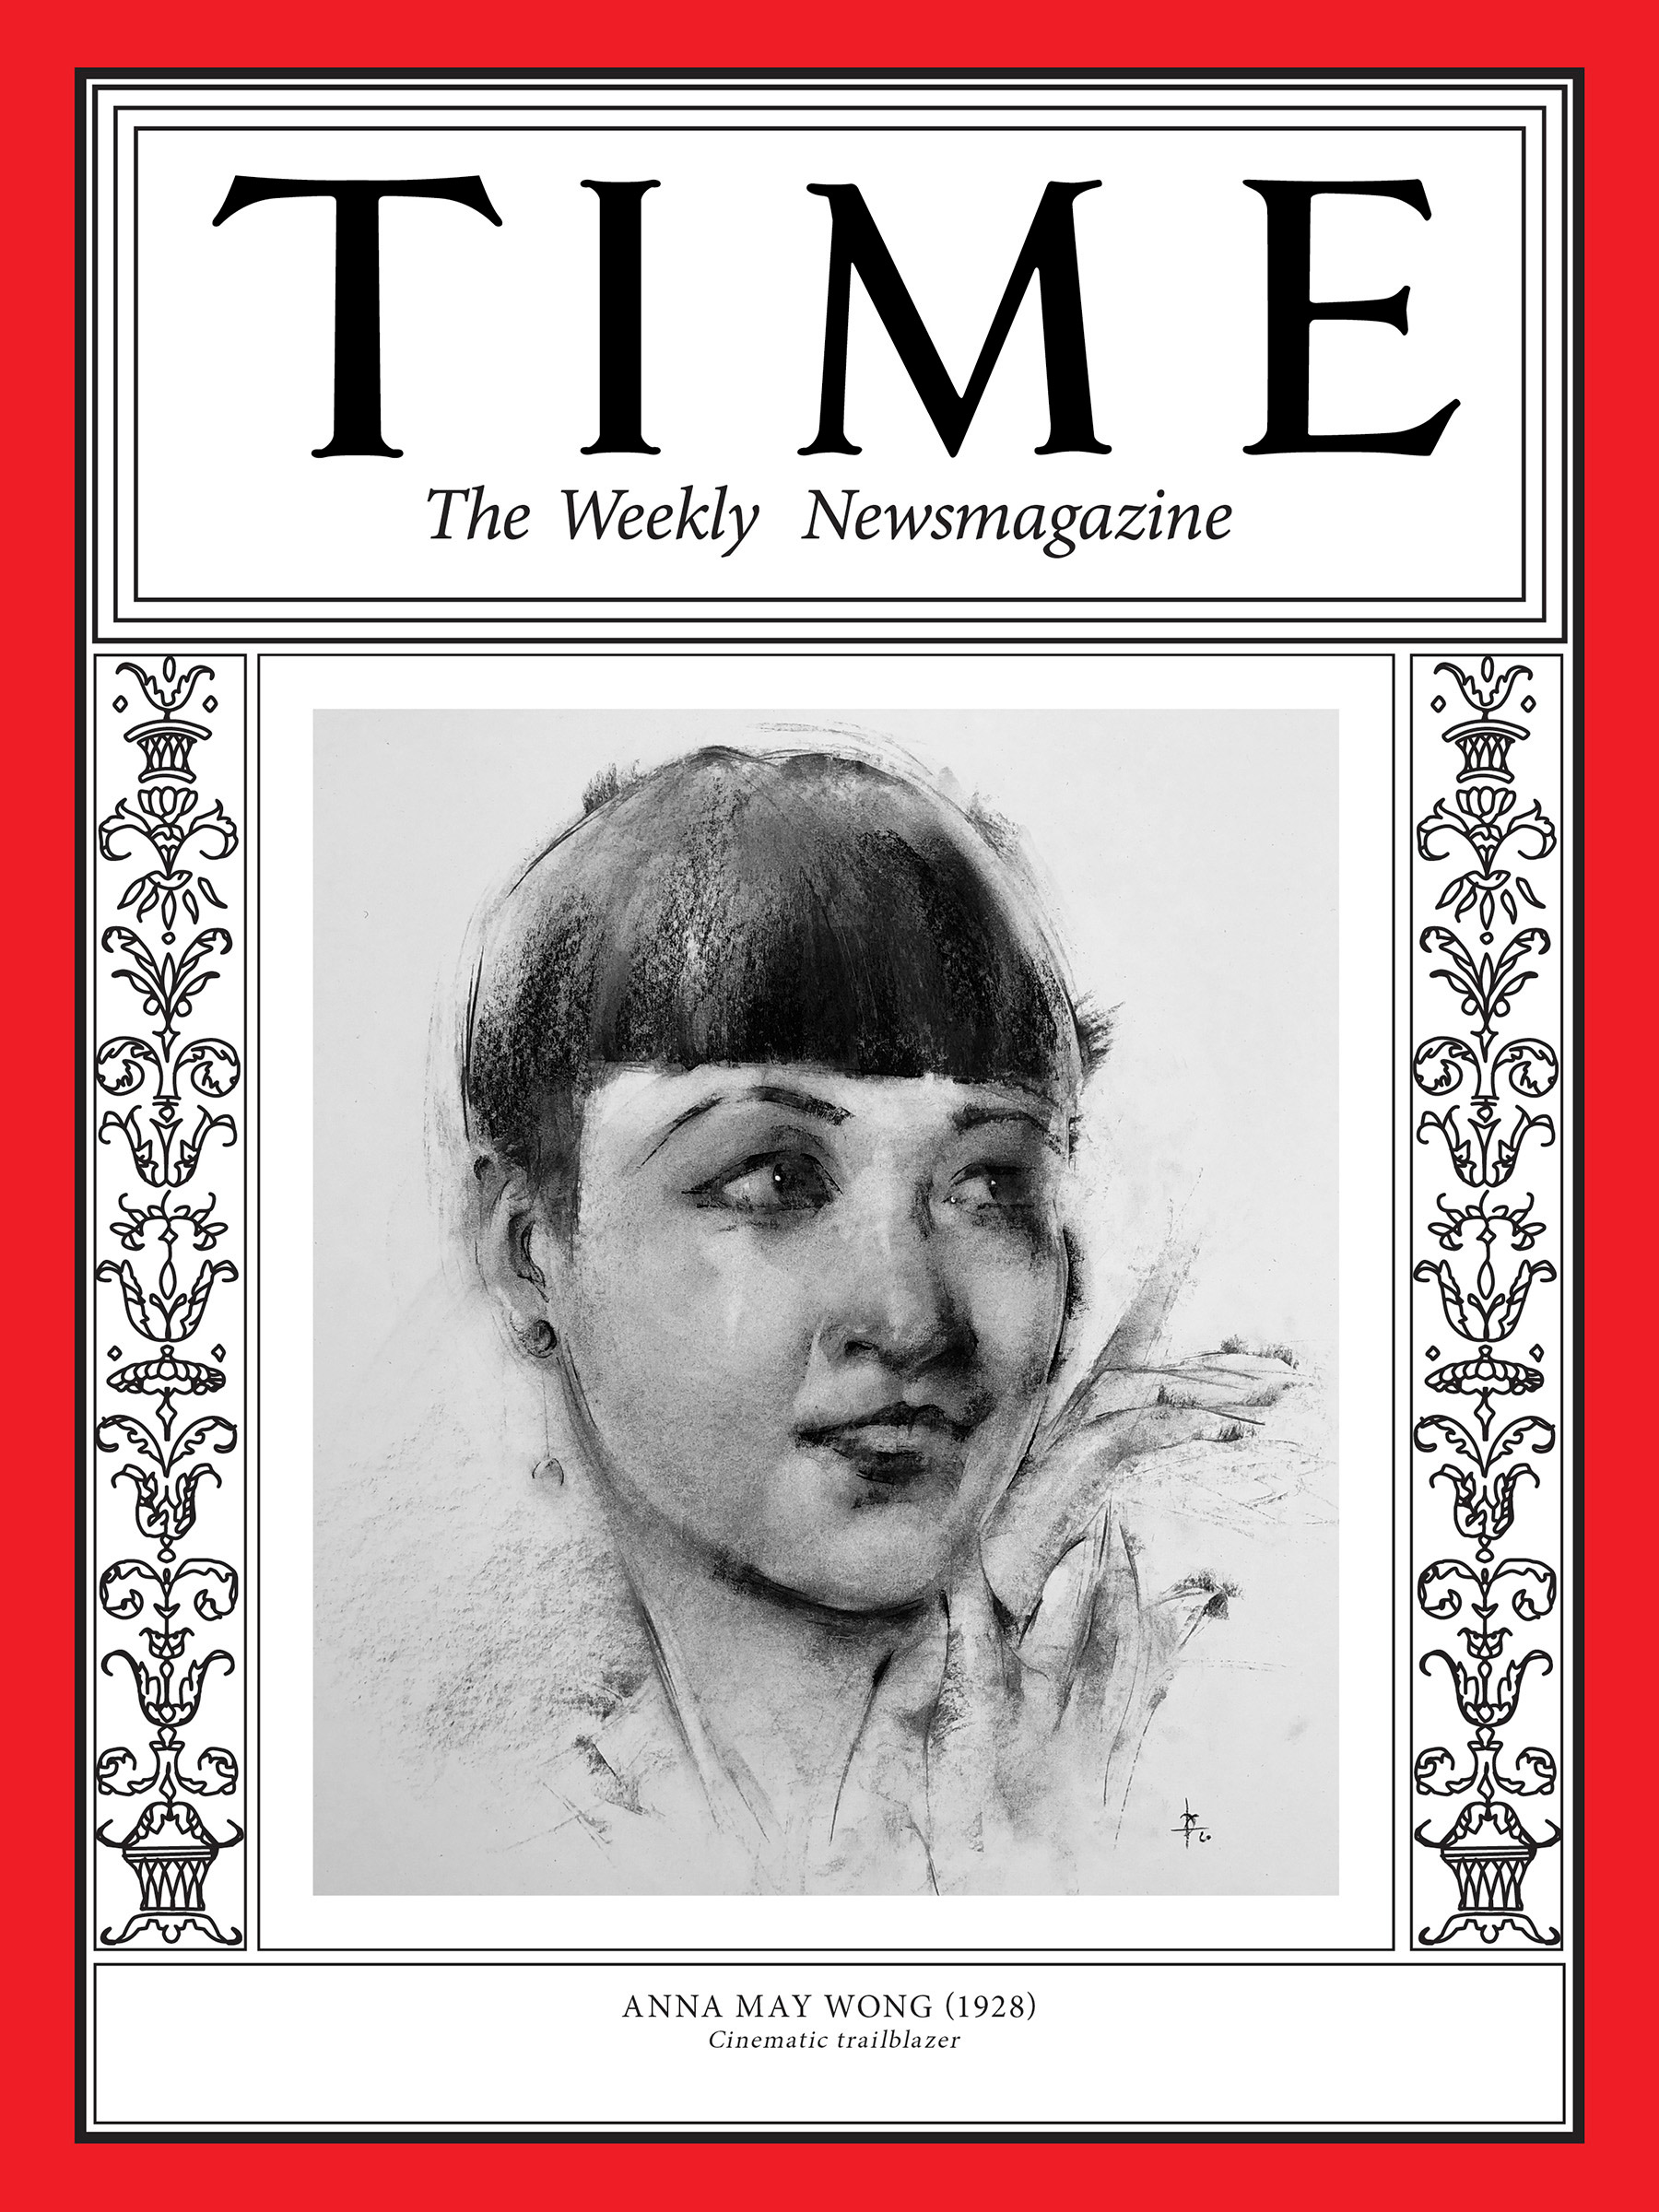 <a href="https://fineartamerica.com/featured/anna-may-wong-1928-time.html"><strong>Buy the cover art→</strong></a> (Illustration by George Dawnay for TIME; Redux)